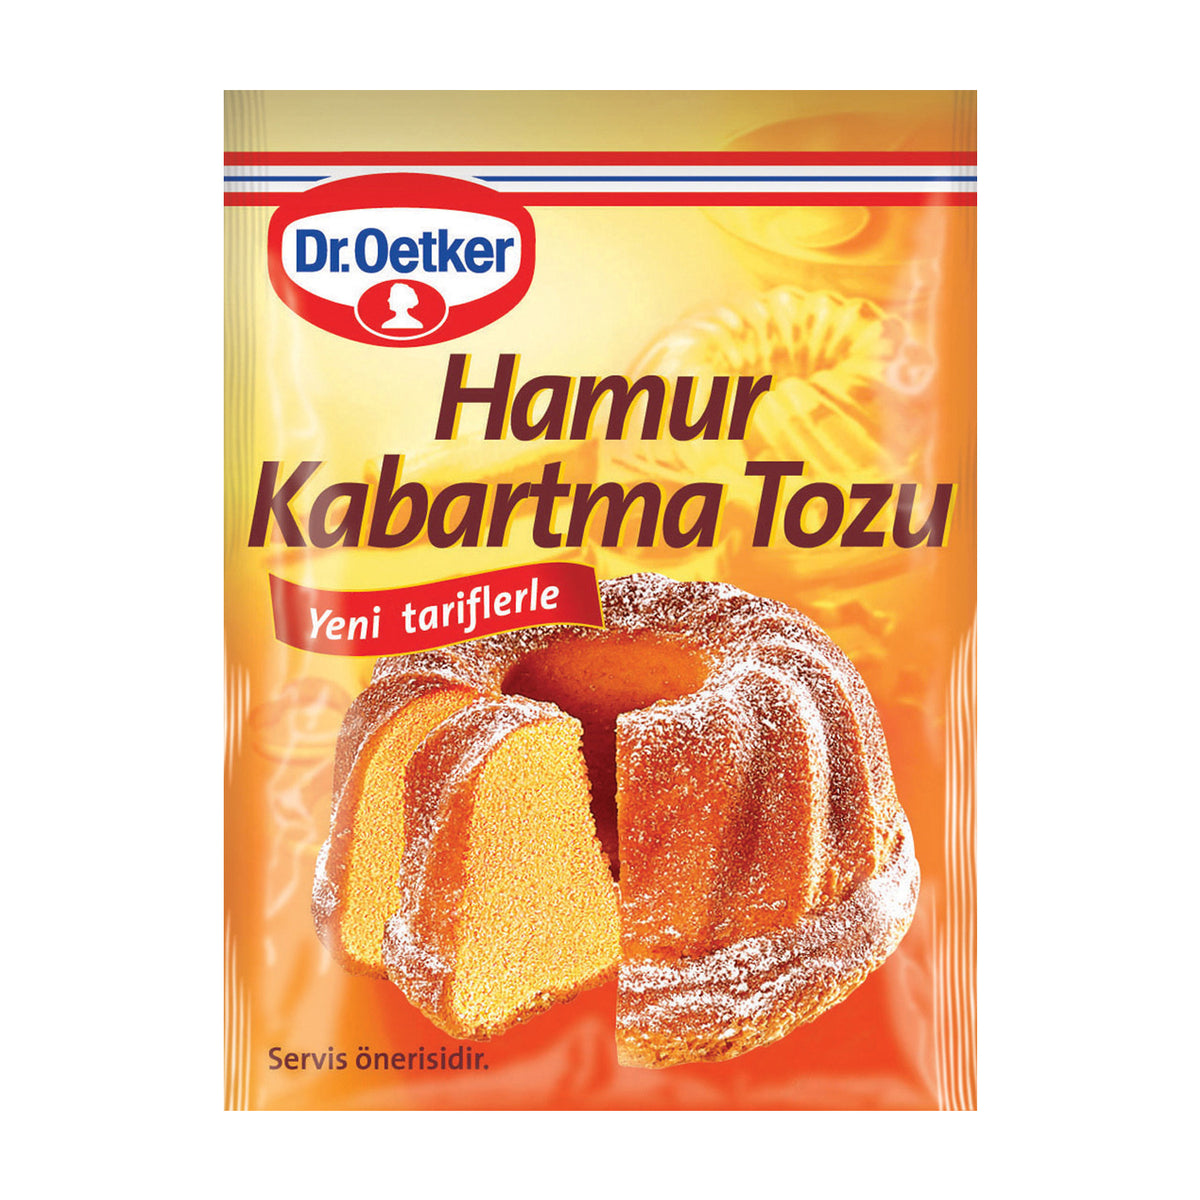 Mishry Mum Kanika Datta Highly Recommends Trying Dr. Oetker Choco Lava Mix